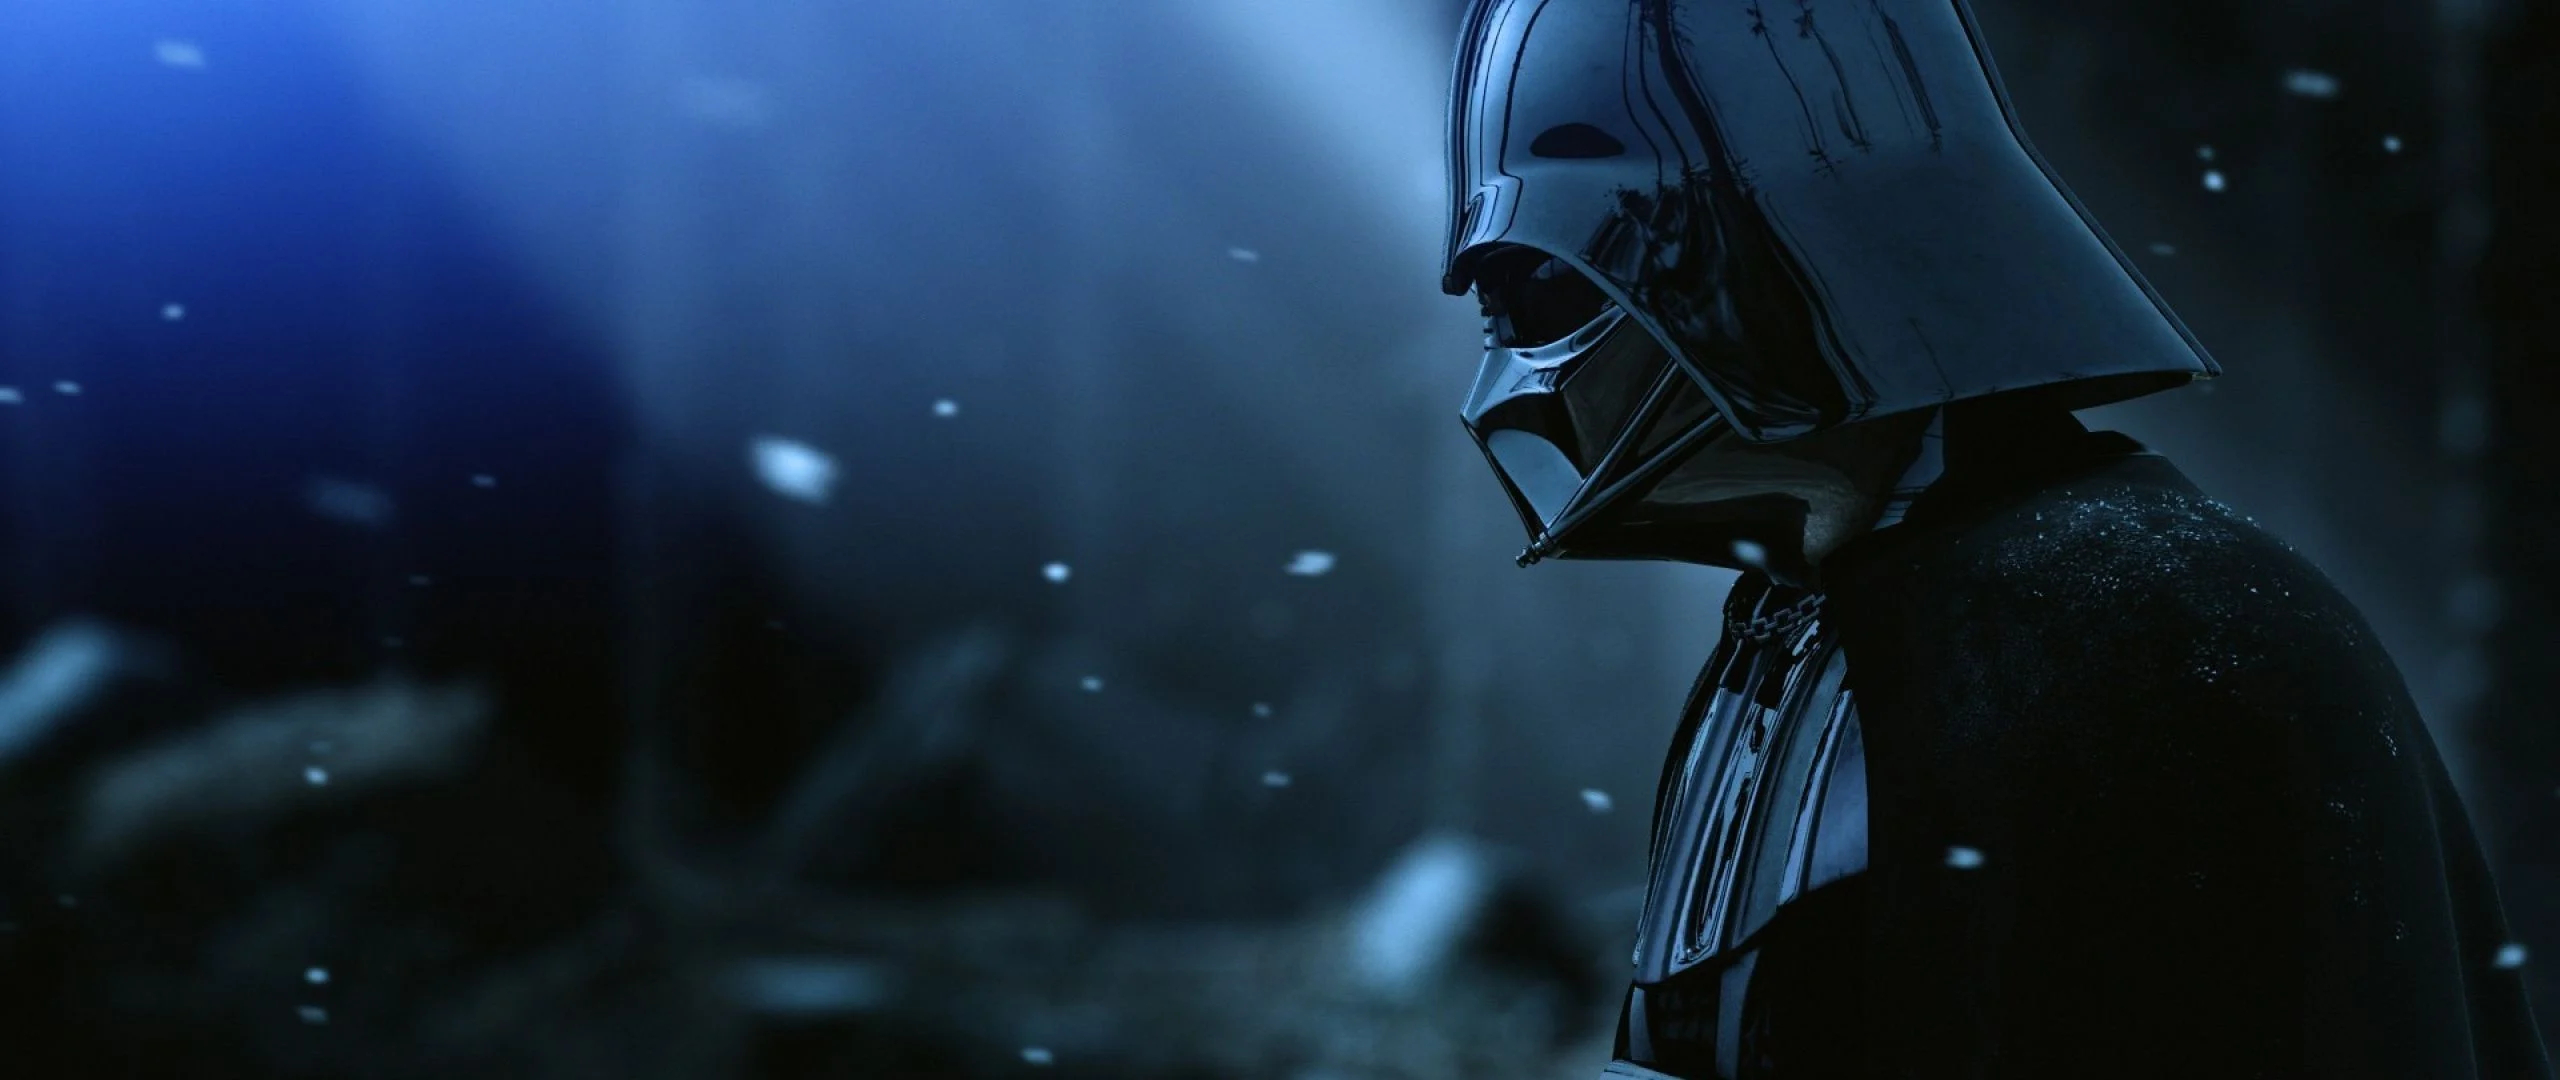 2560x1080 Star Wars 2560 X 1080 Wallpapers Top Free Star Wars 2560 X 1080 Backgrounds